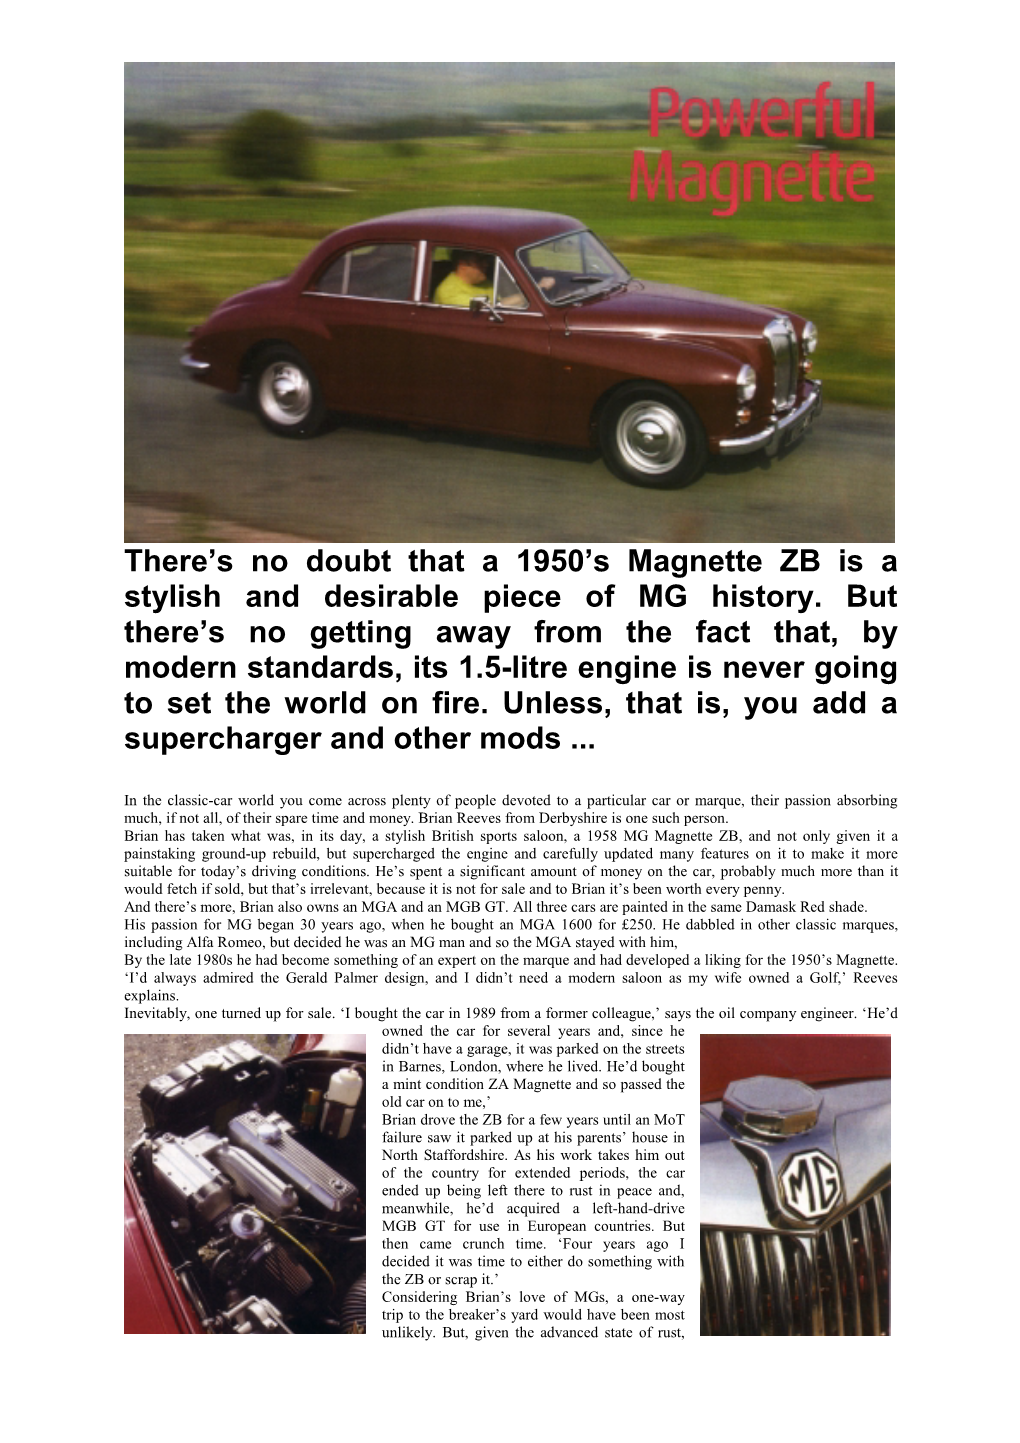 There's No Doubt That a 1950'S Magnette ZB Is a Stylish And